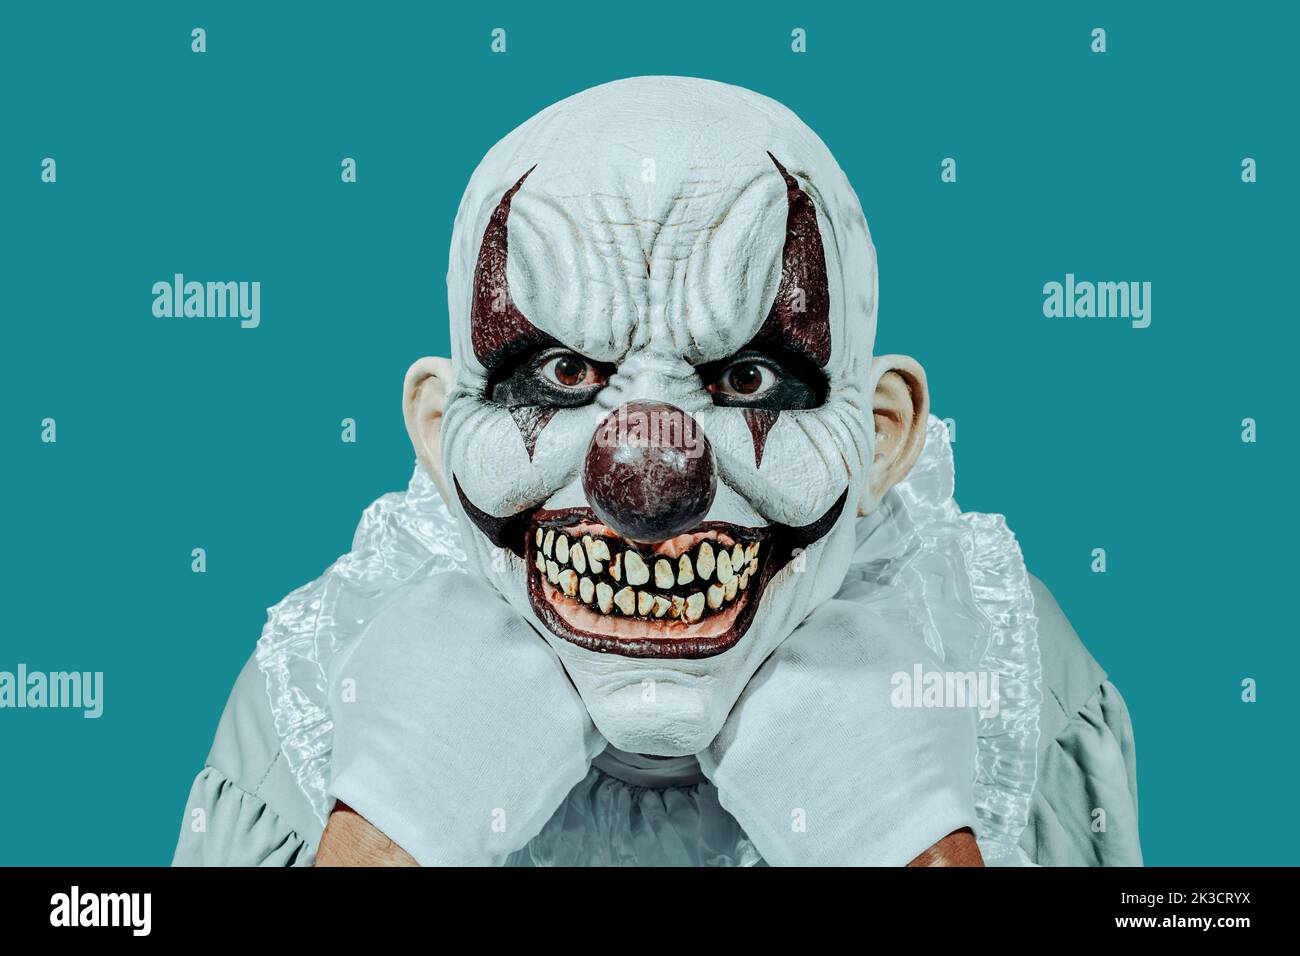 a bald evil clown, wearing white gloves and a costume with a white ruff, staring at the observer with a creepy smile, leaning his head in his hands, o Stock Photo